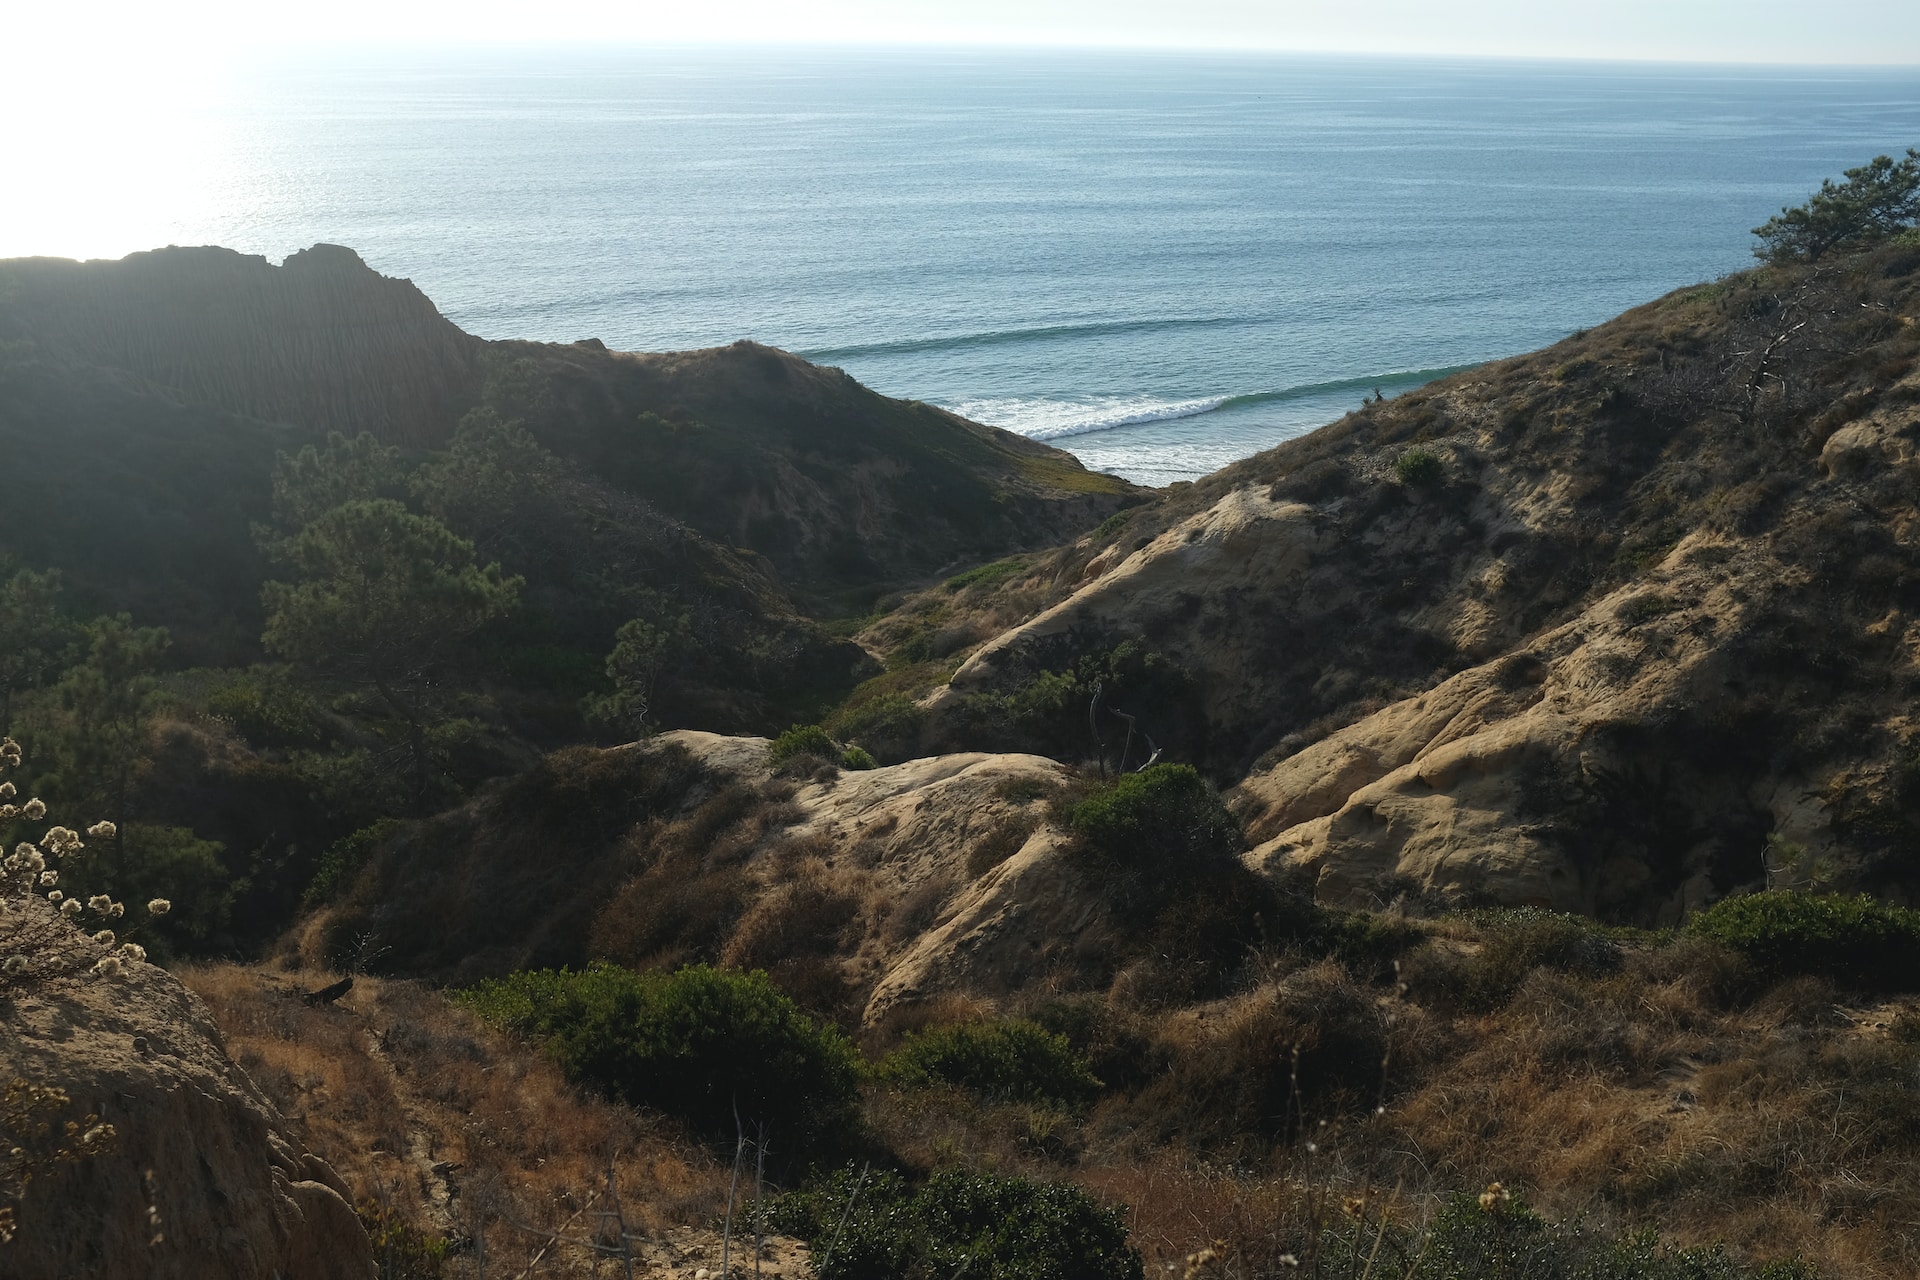 What To Do at La Jollas Torrey Pines State Natural Reserve